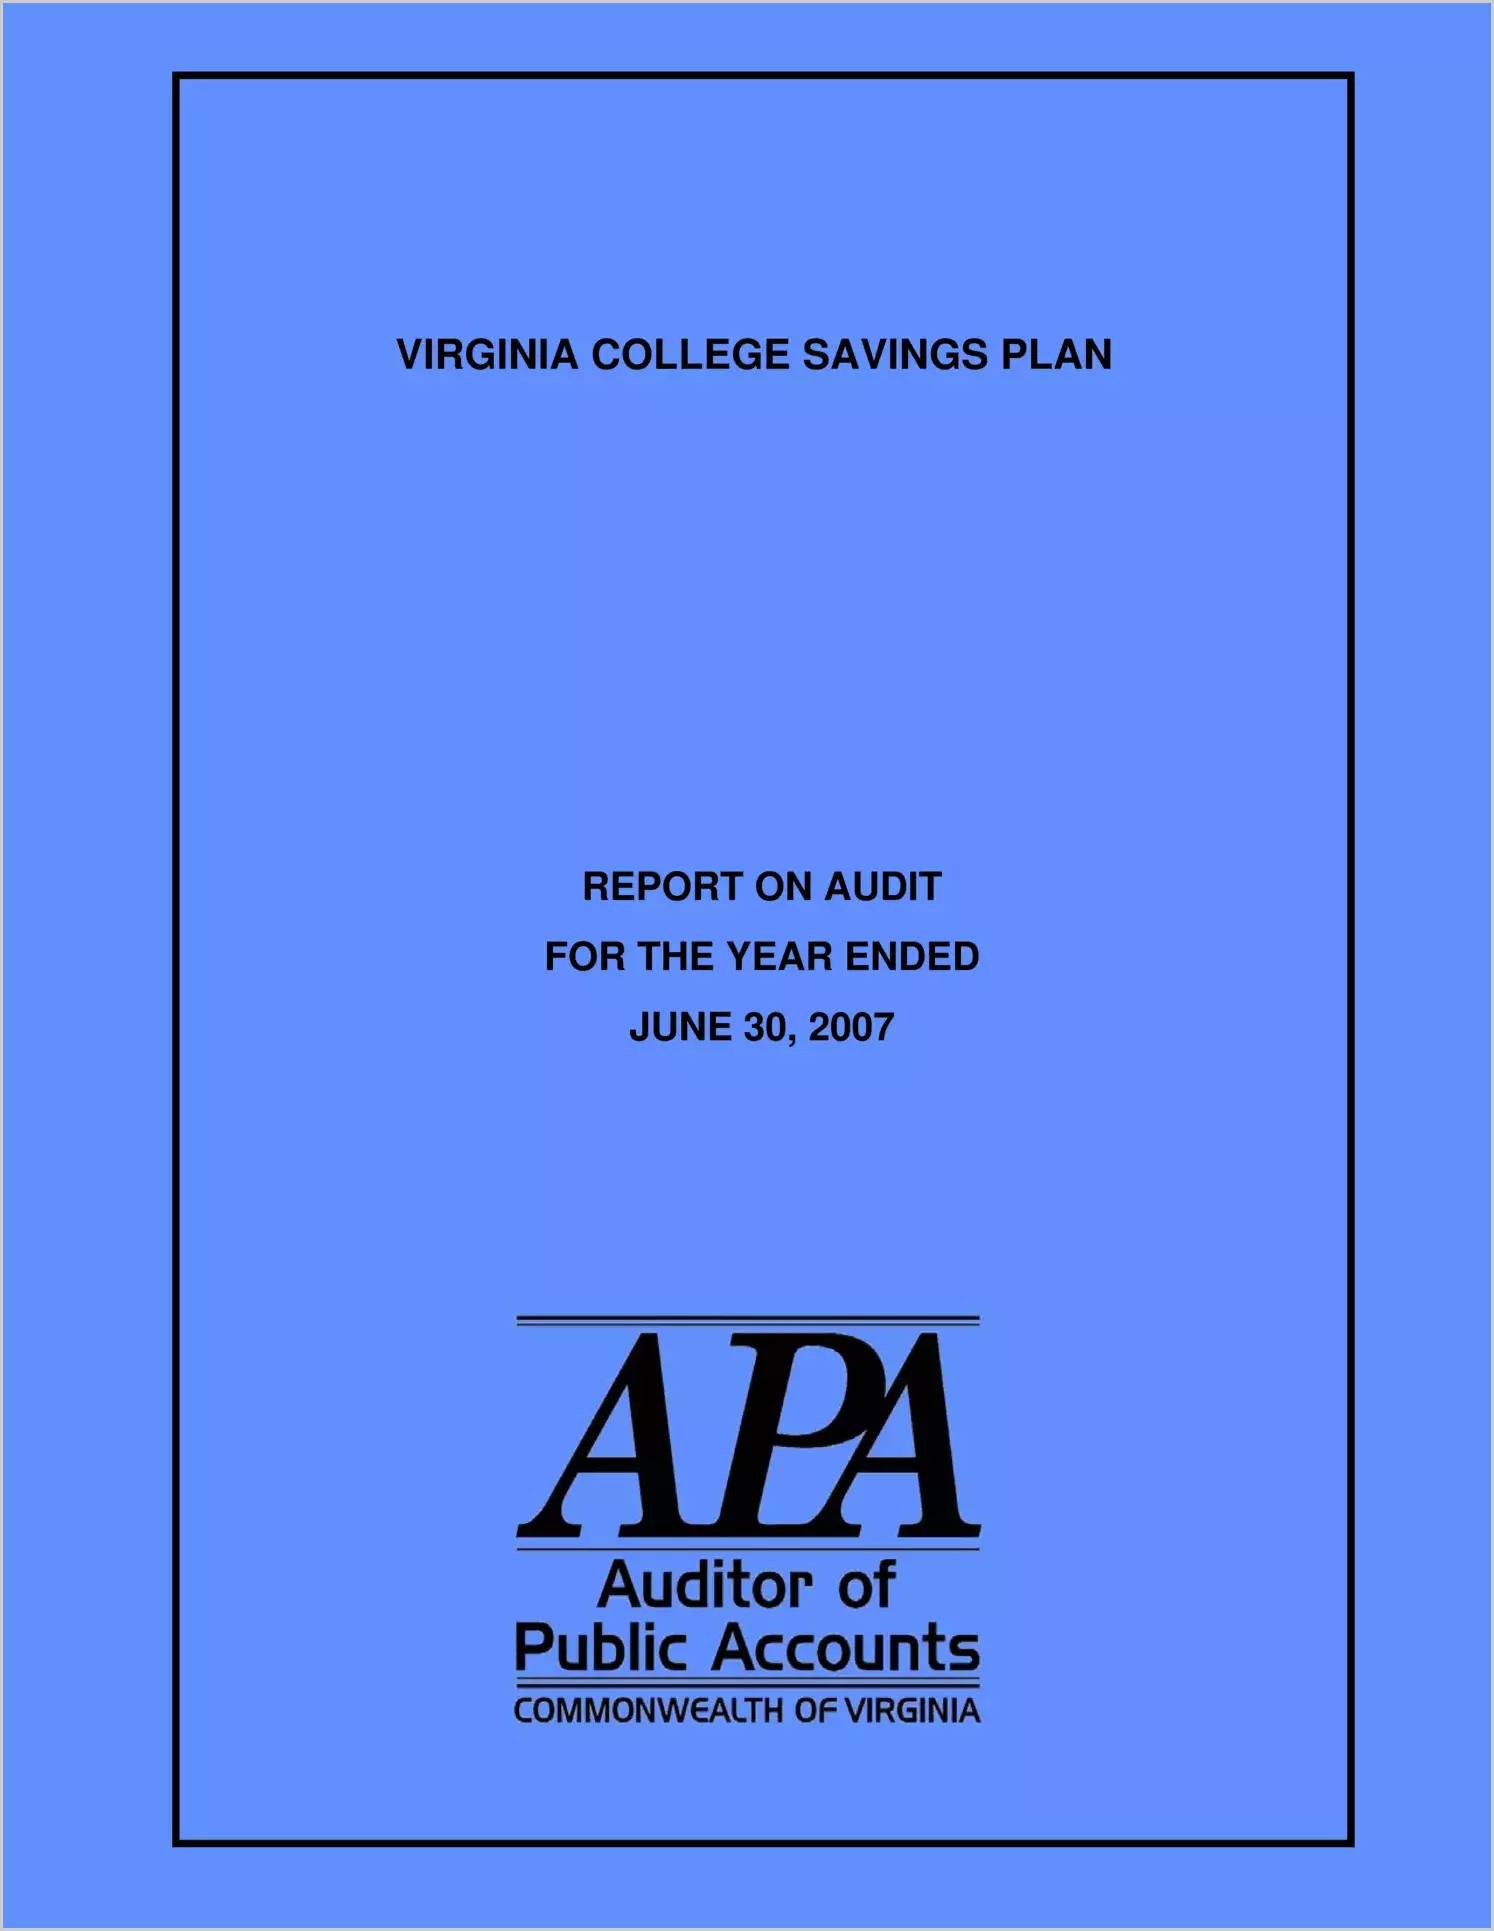 Virginia College Savings Plan for the year ended June 30, 2007